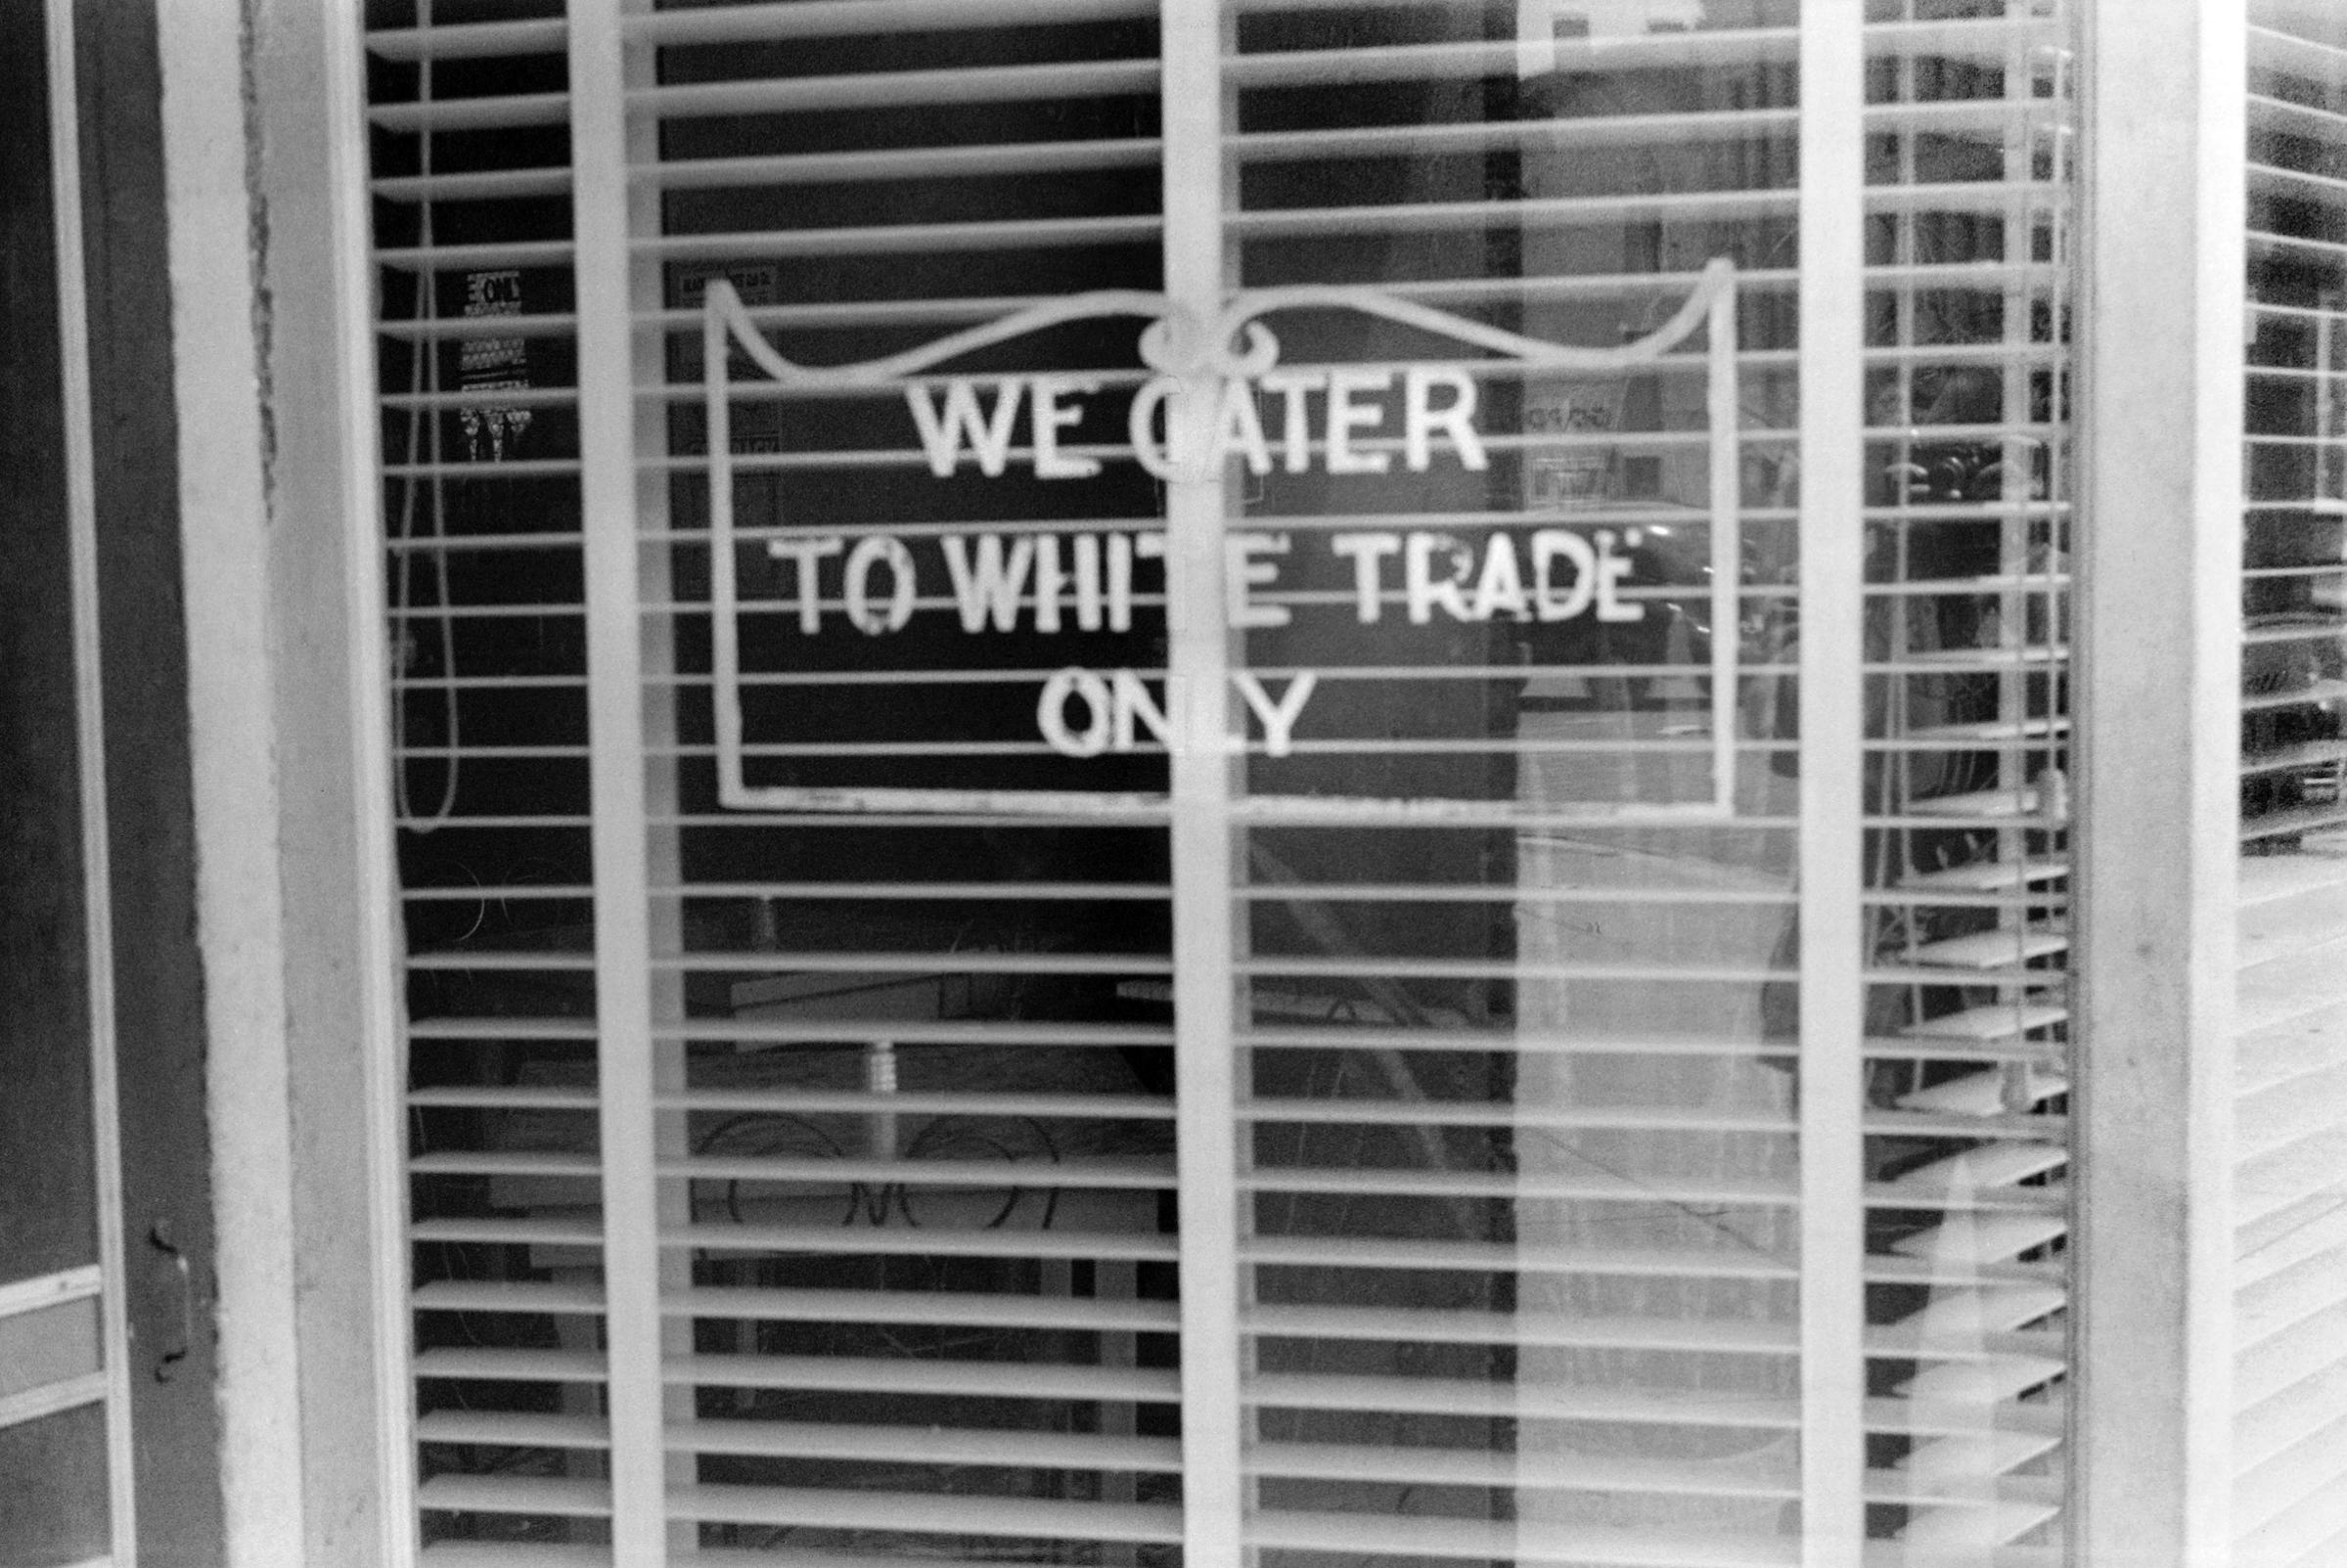 Restaurant with Sign "We Cater to White Trade Only", Lancaster Ohio, USA, Ben Shahn, Farm Security Administration, August 1938